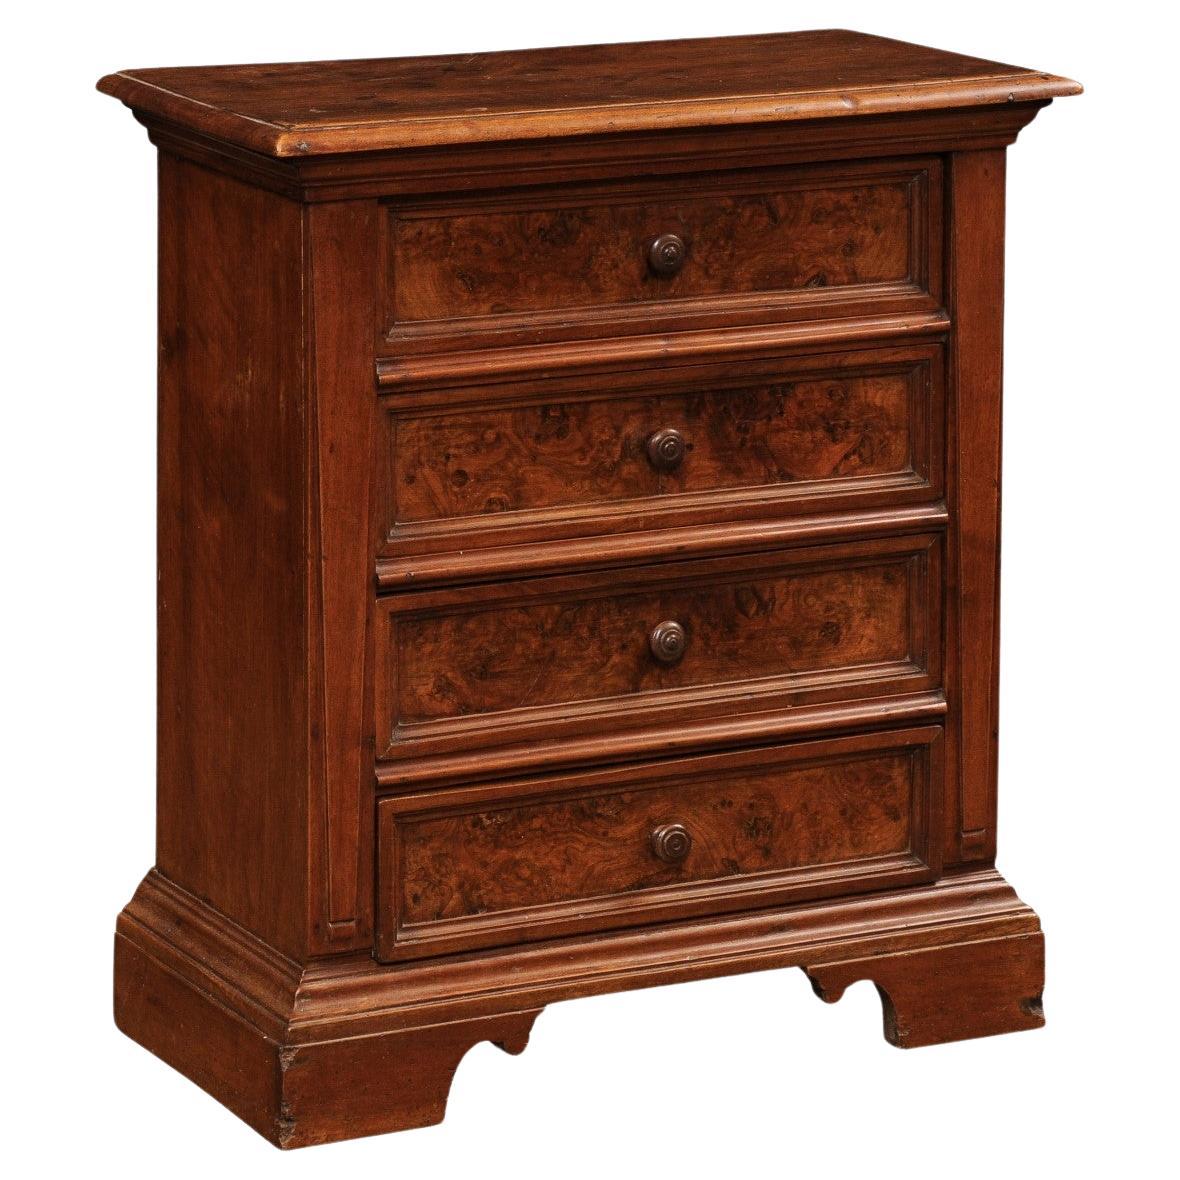 Italian 1840s Bedside Chest with Four Drawers, Burl Panels and Bracket Feet For Sale